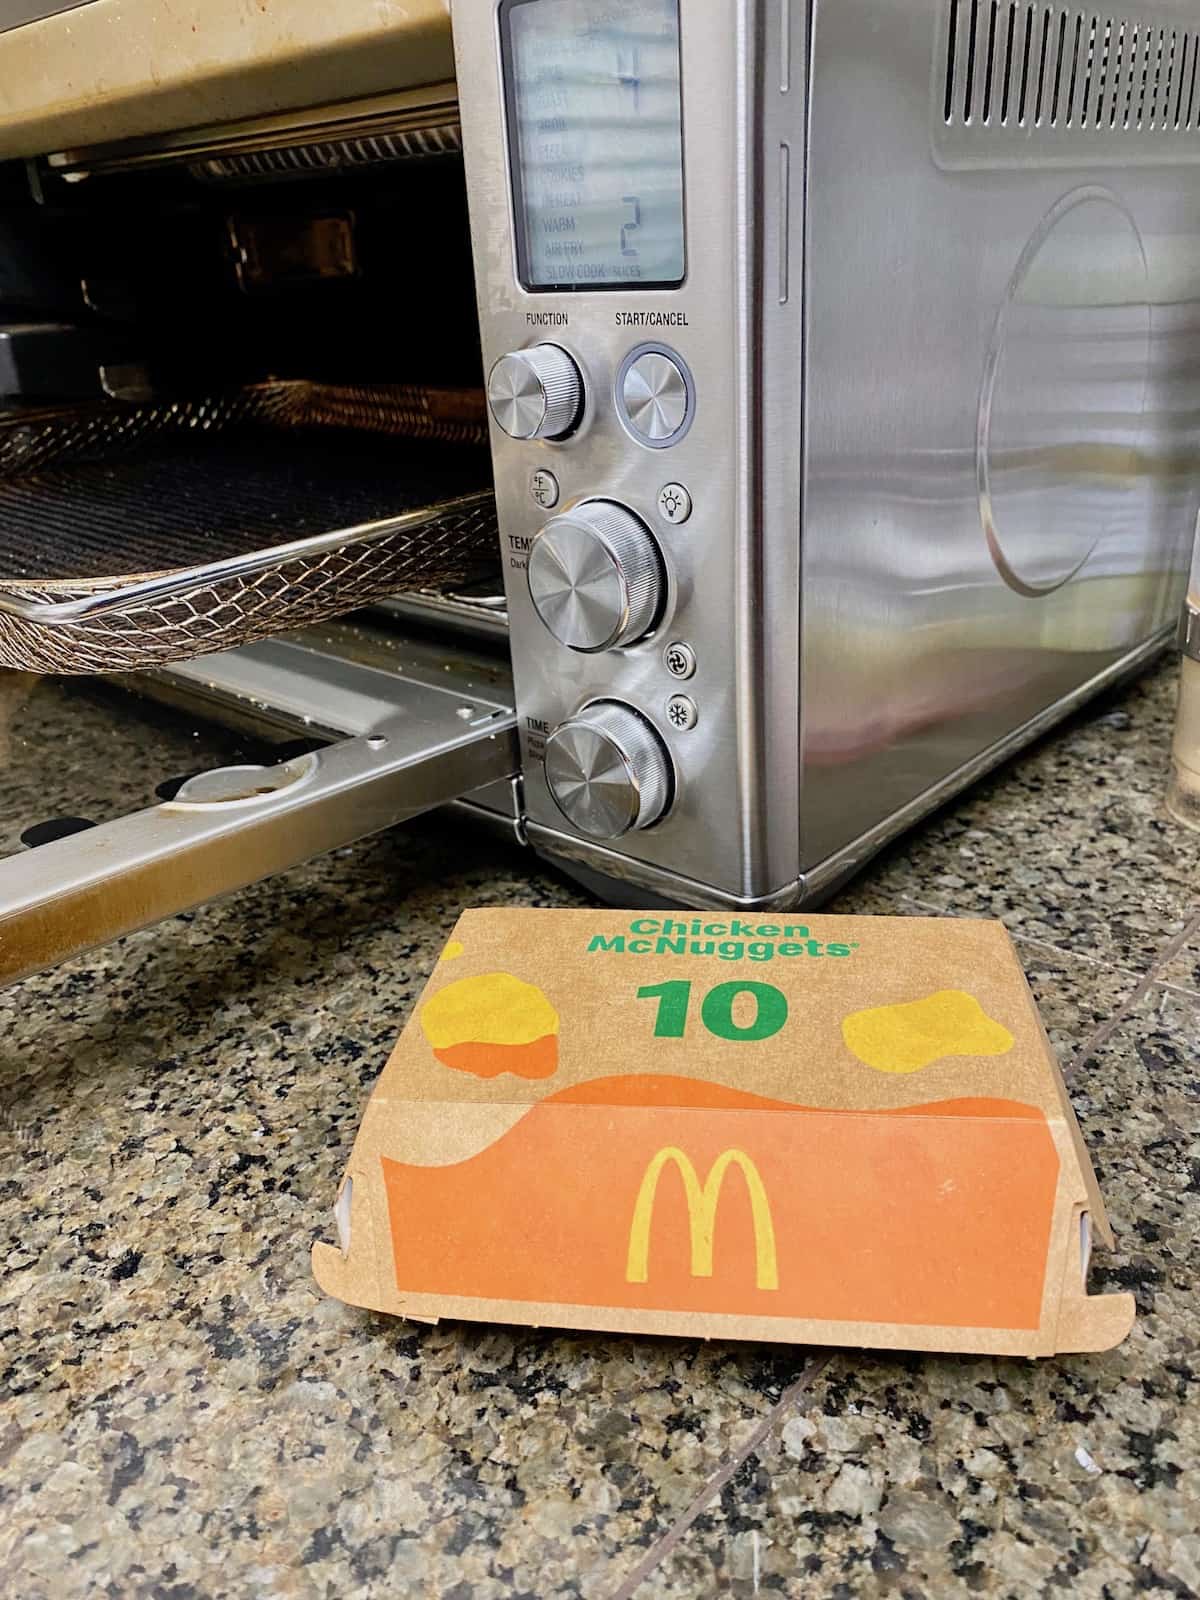 Box of nuggets in front of the air fryer machine.